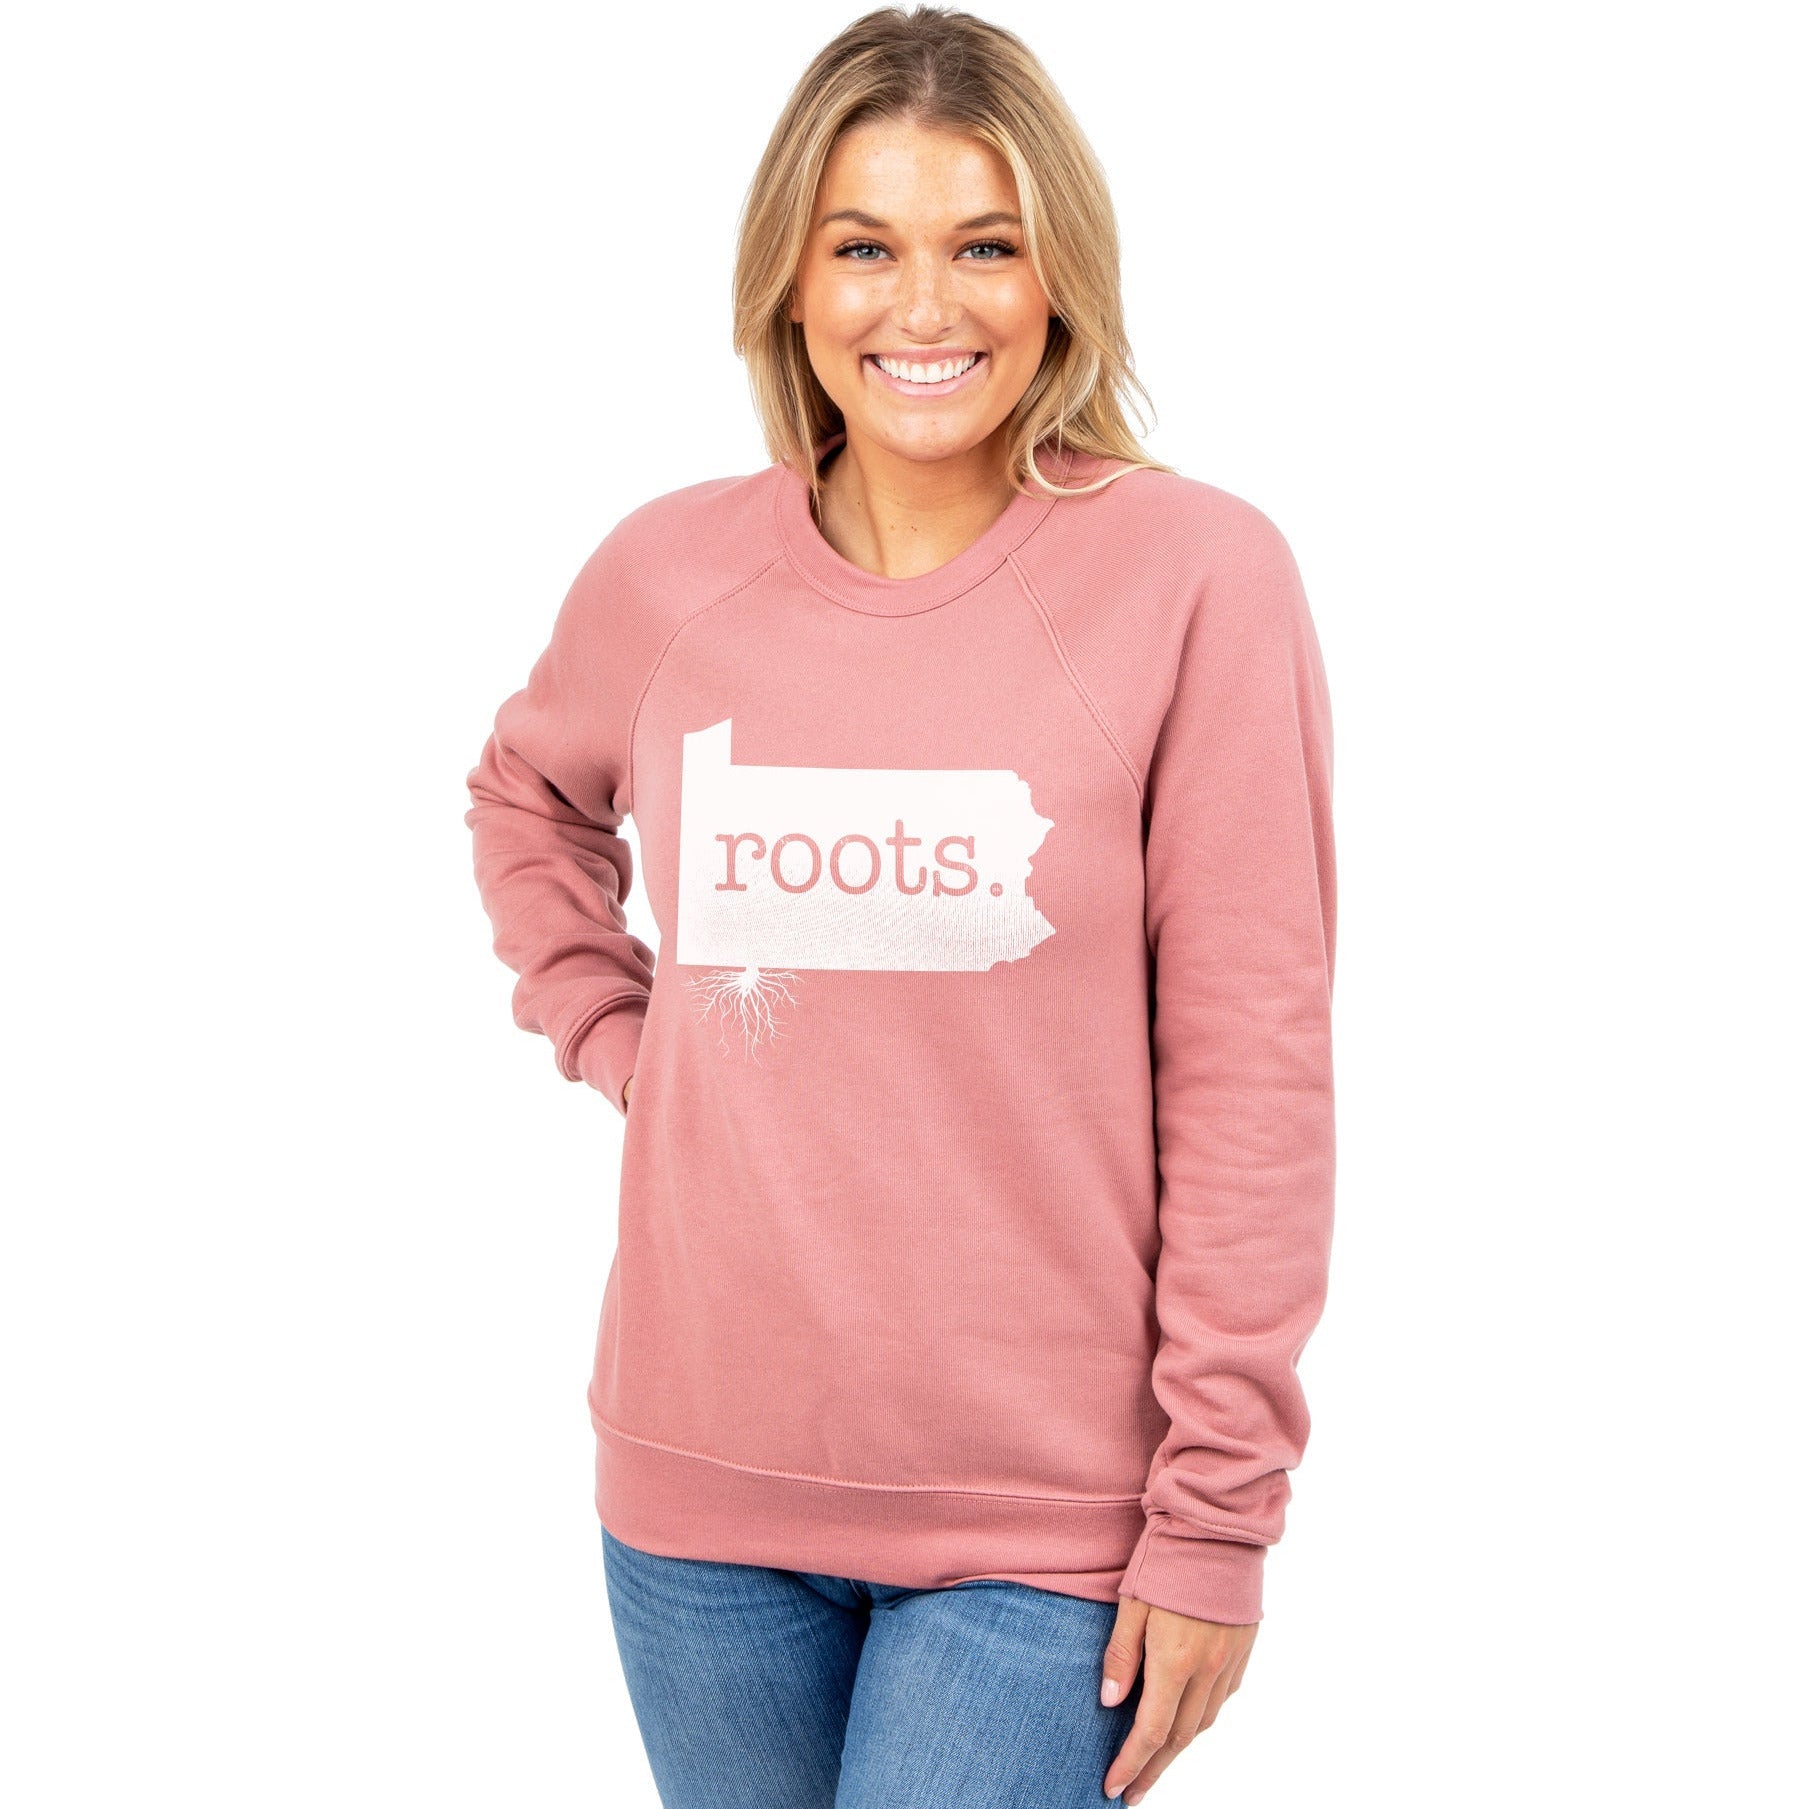 Roots State Pennsylvania - Stories You Can Wear